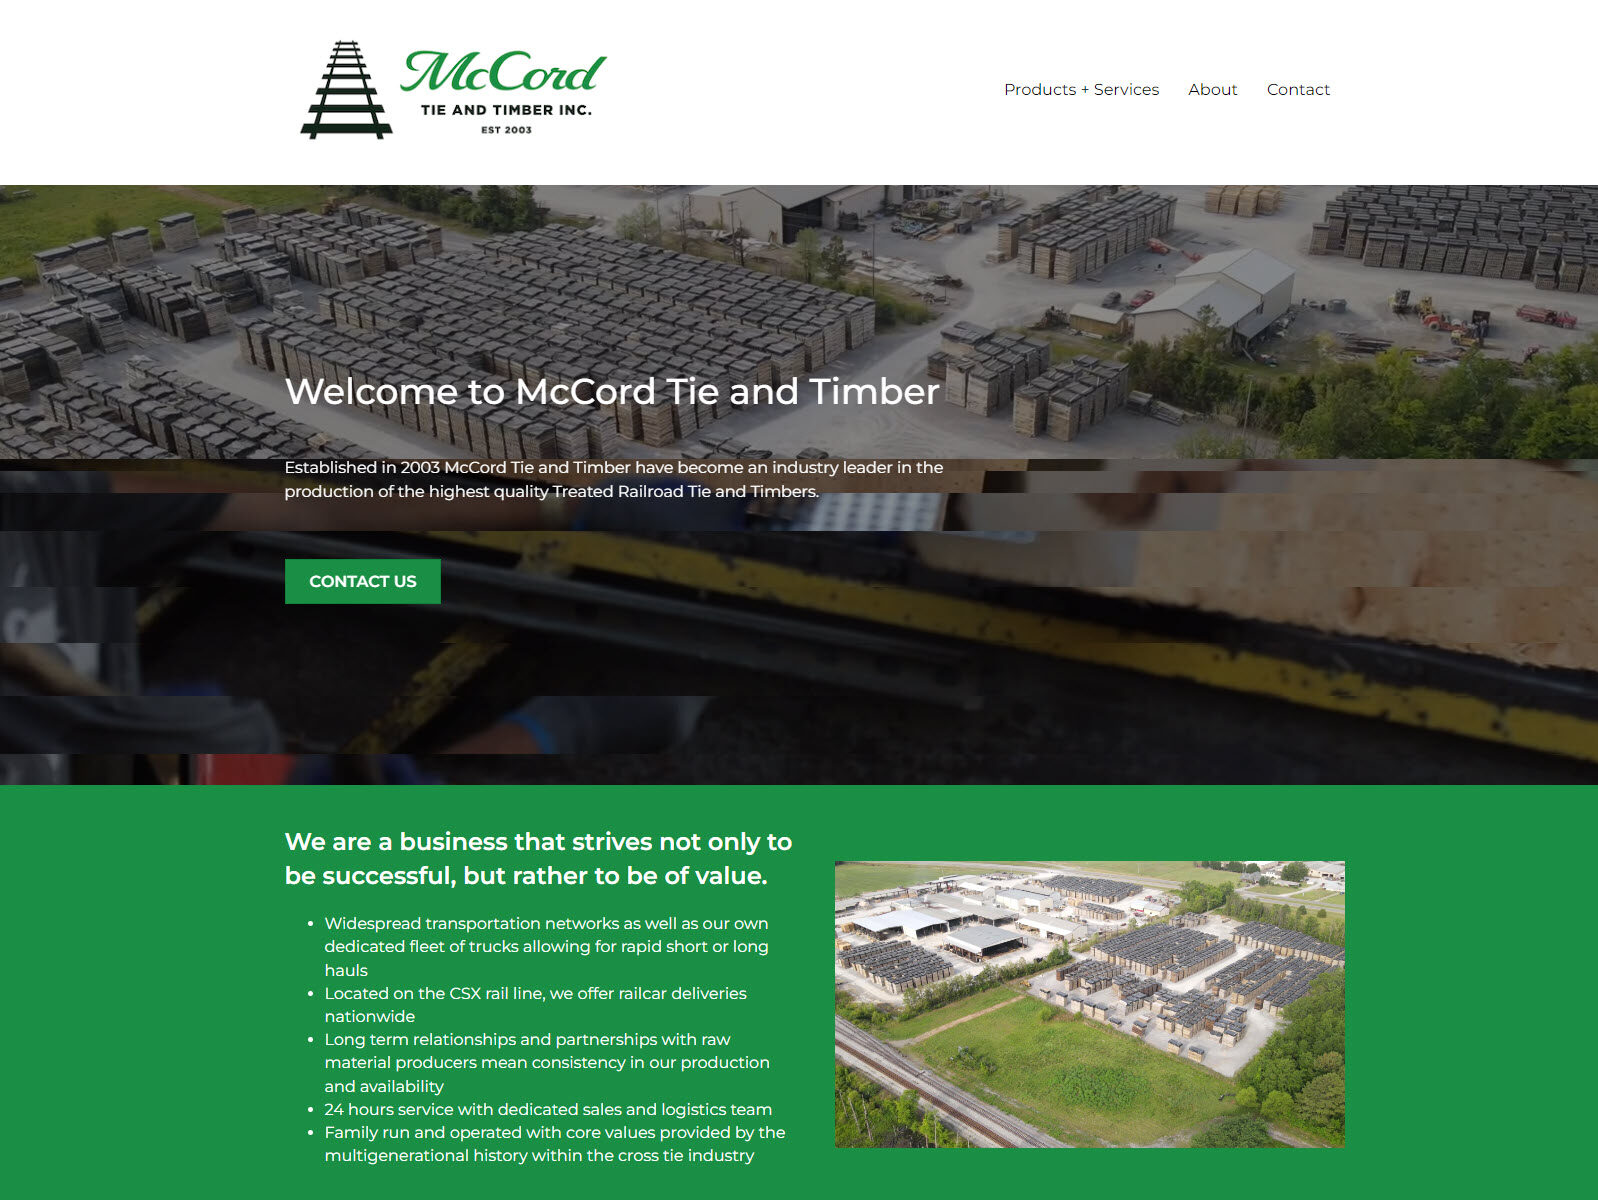 Homepage for McCord Tie and Timber